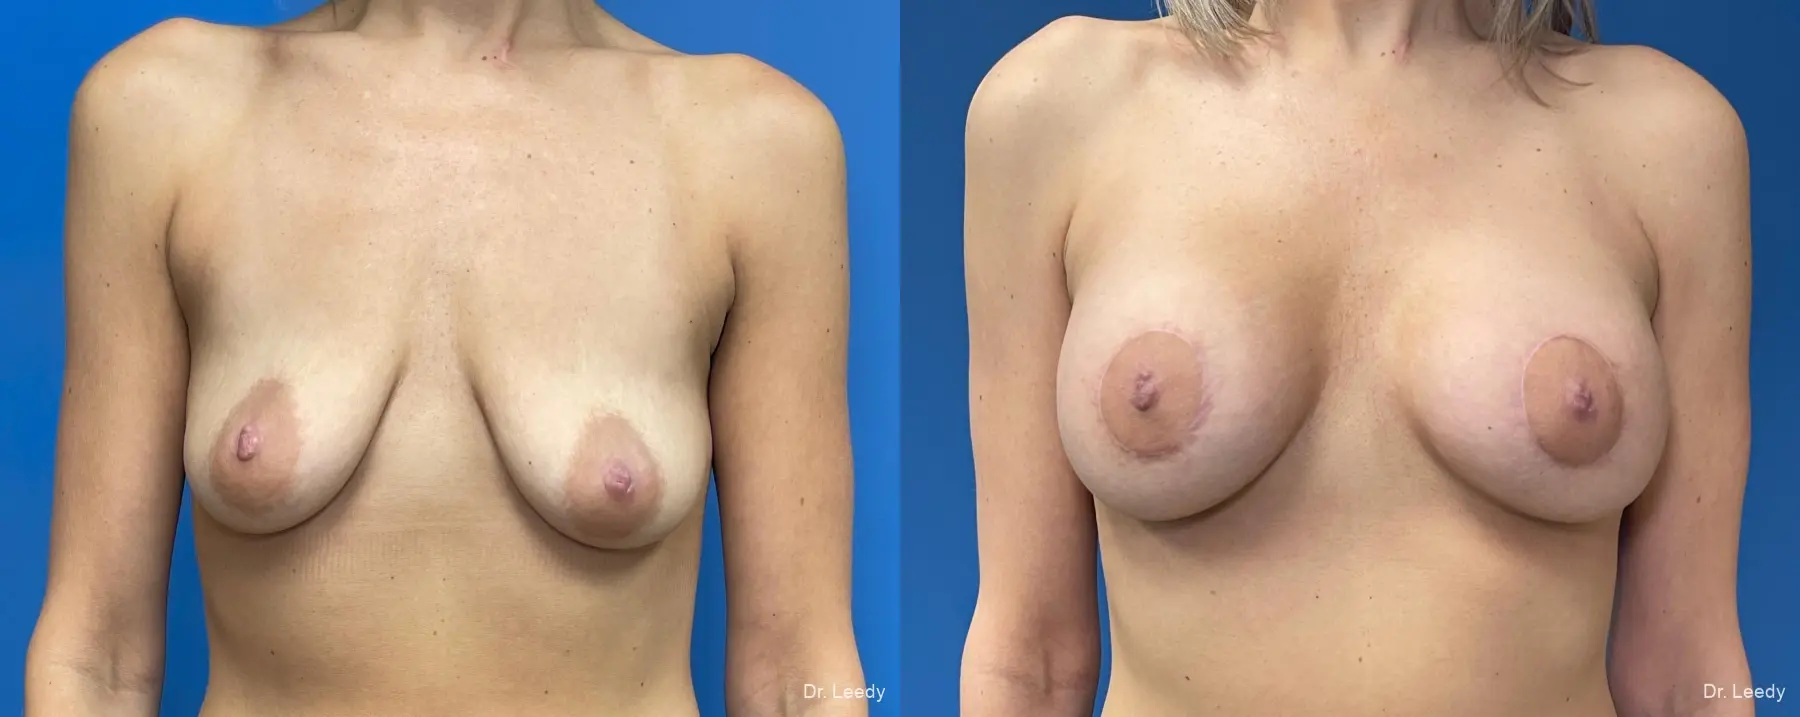 Breast Lift And Augmentation: Patient 4 - Before and After  